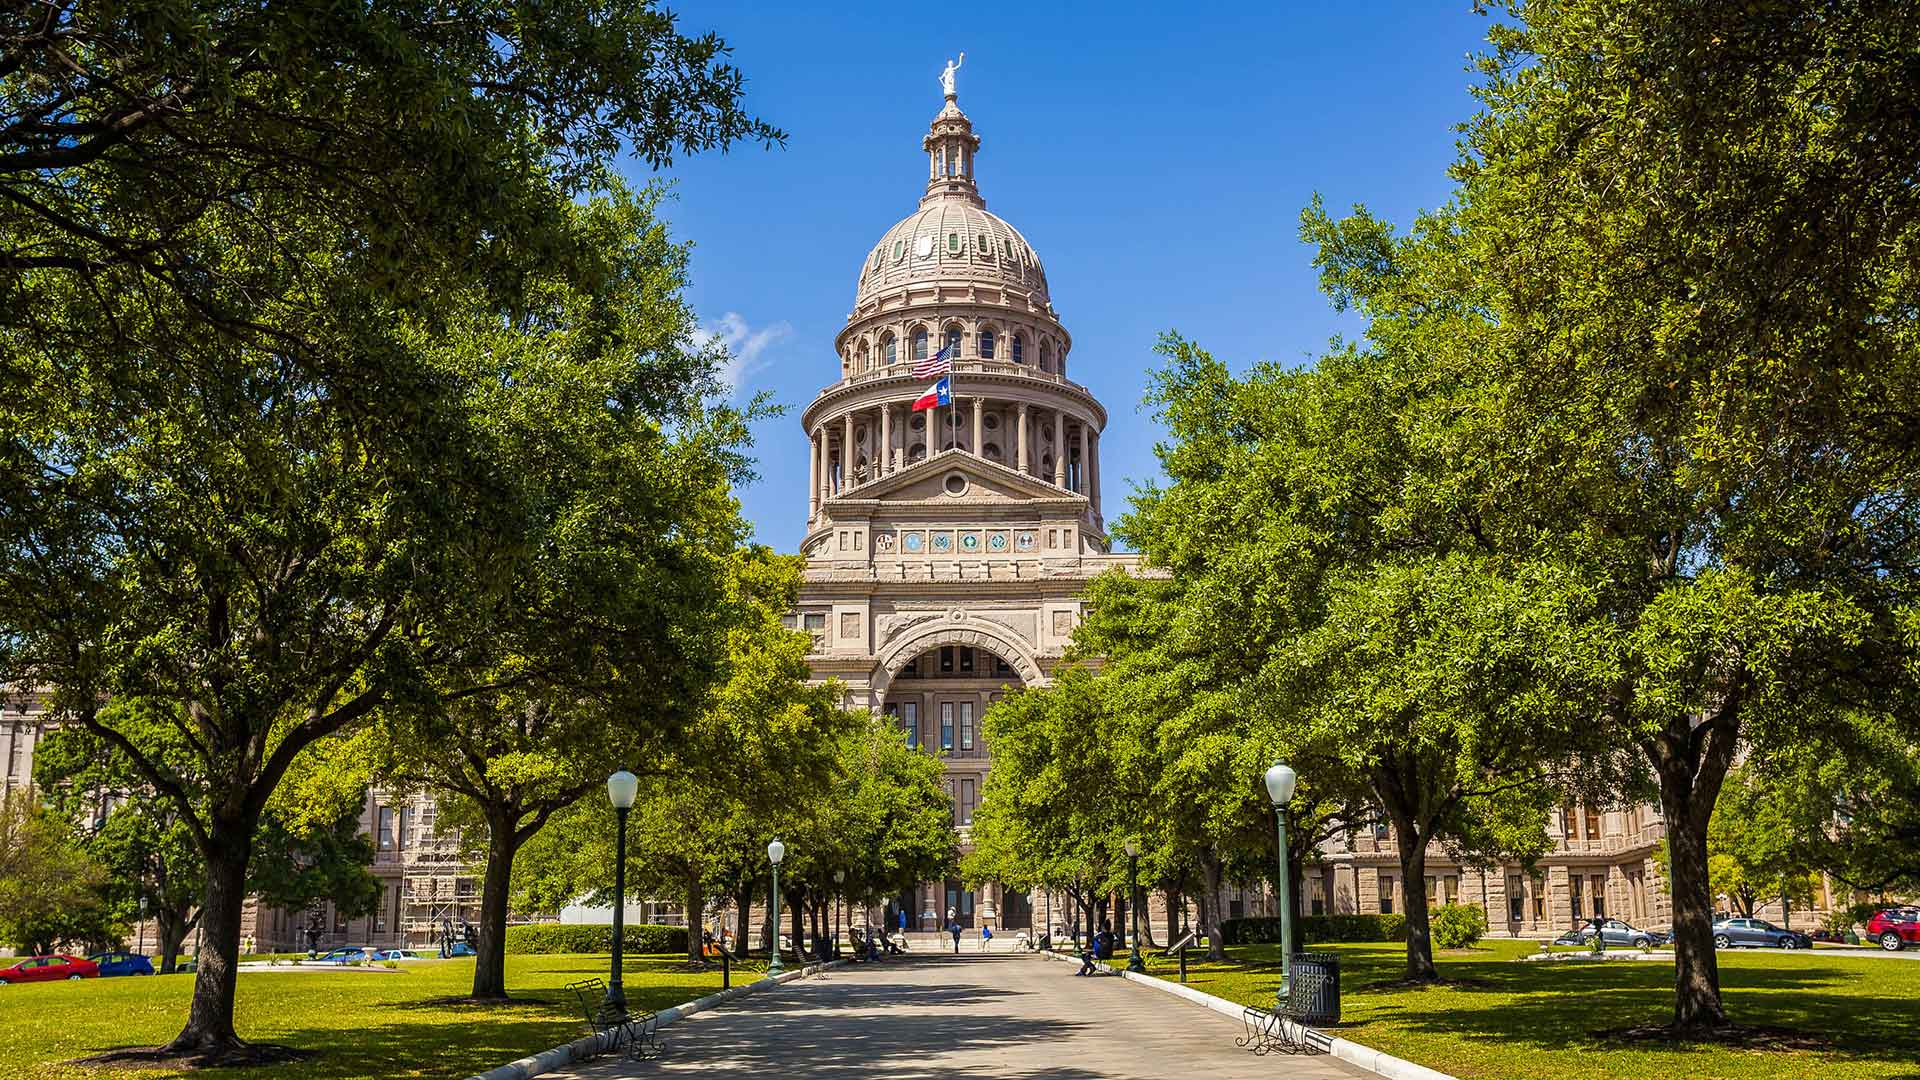 The capitol building in Austin, Texas.